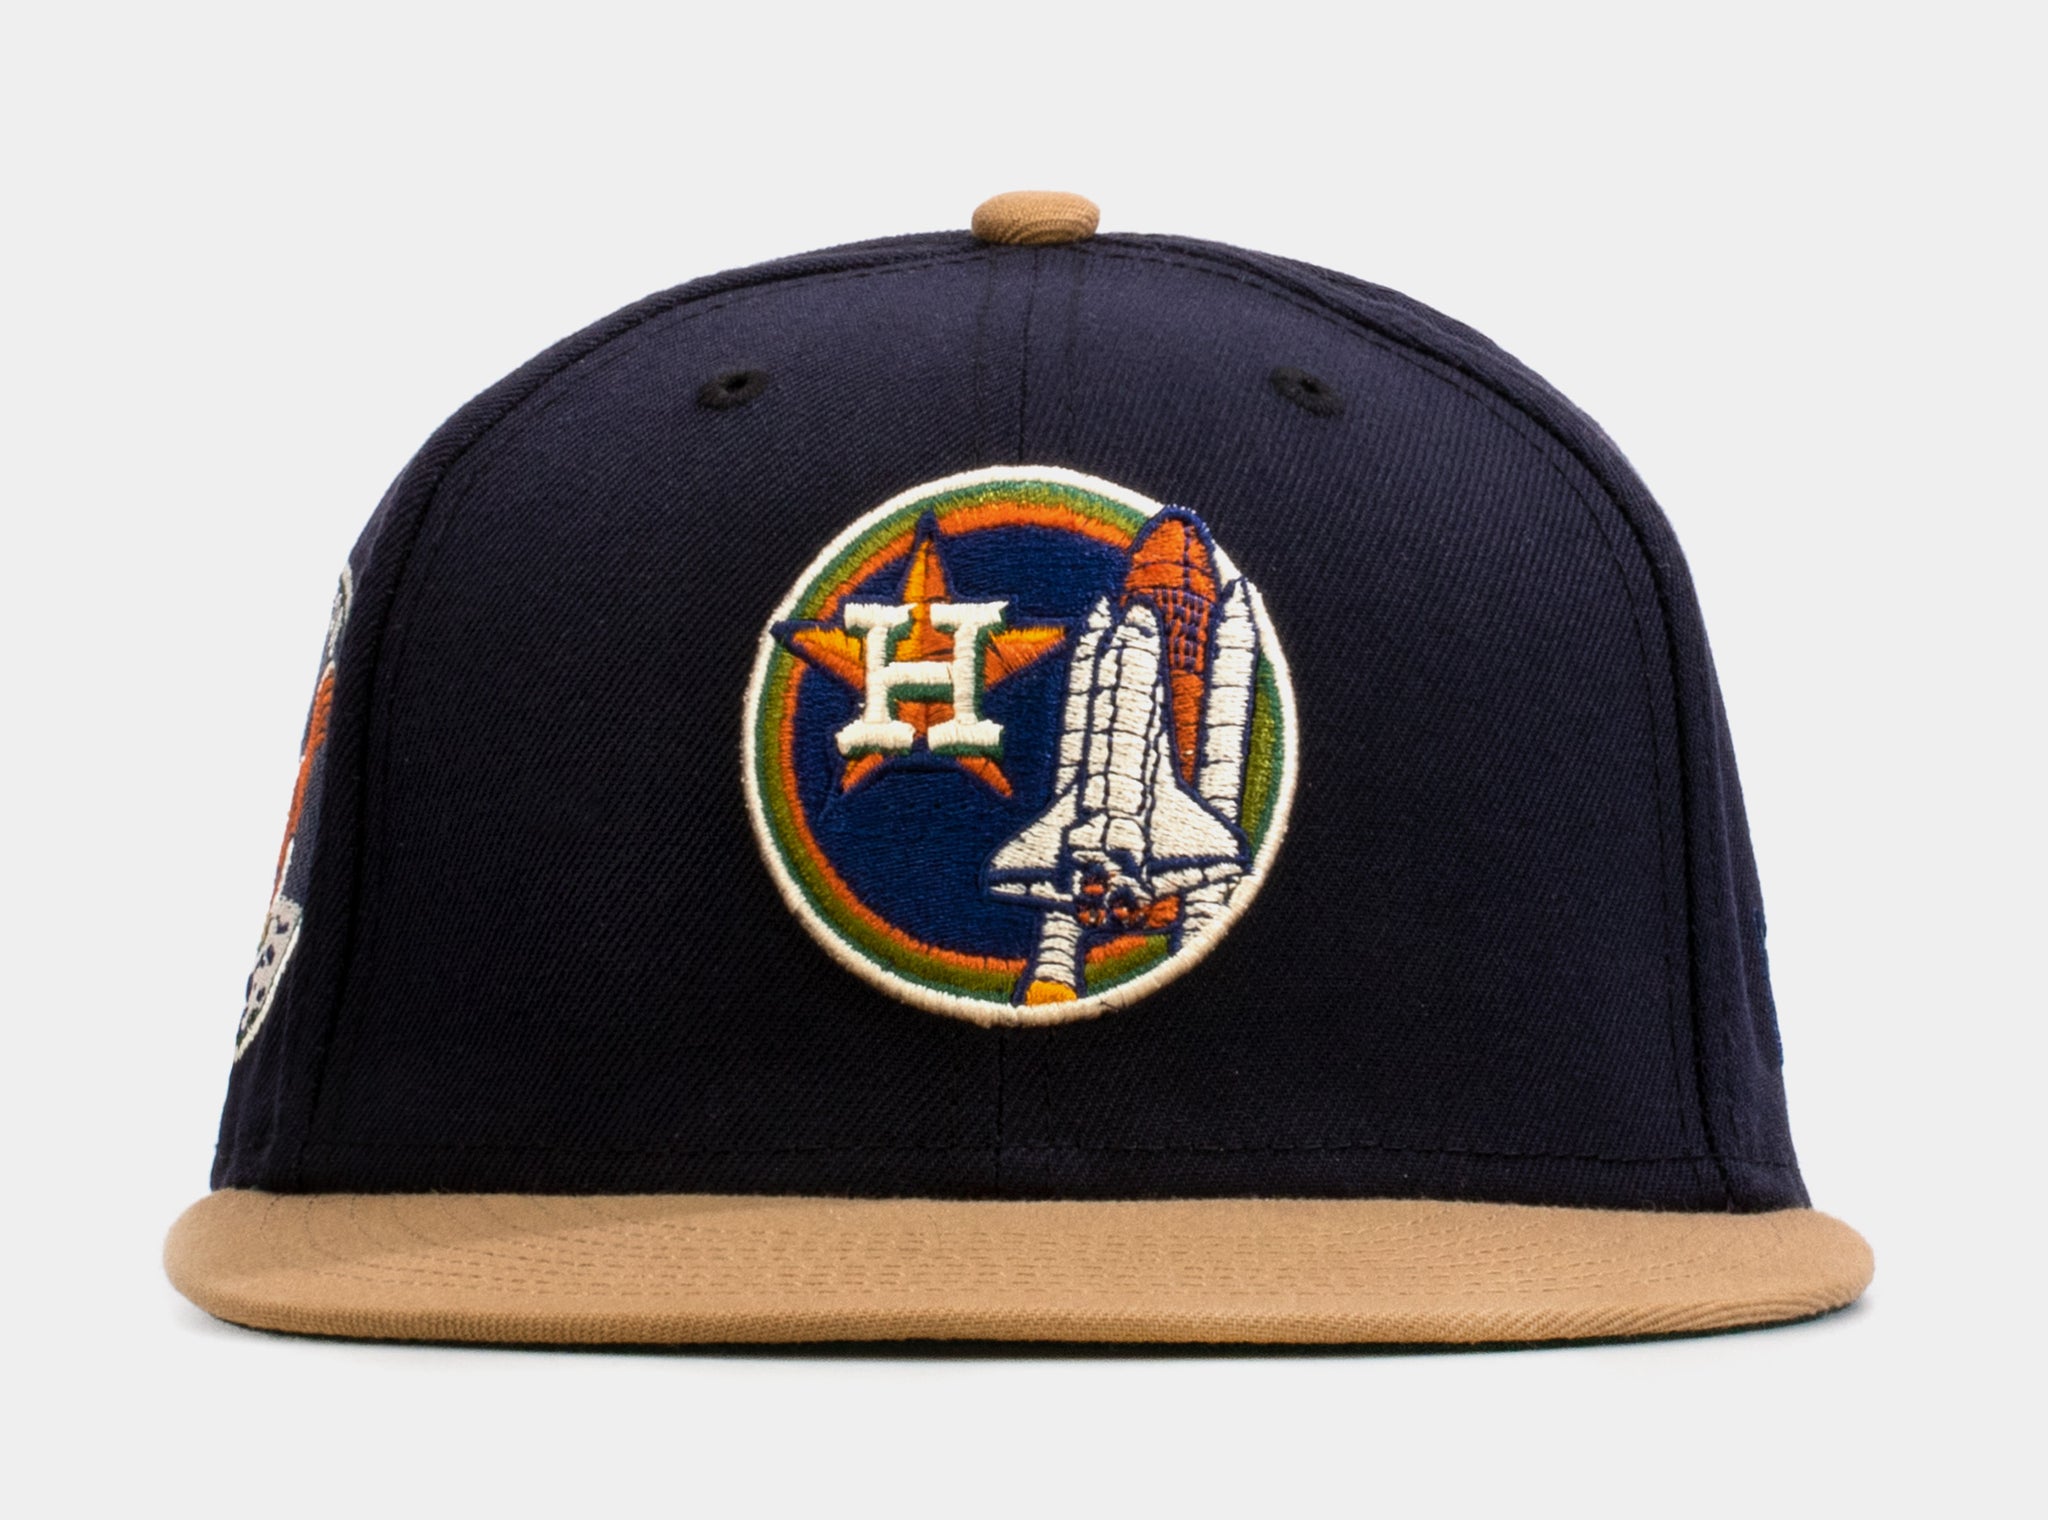 New Era SP Exclusive Black Corduroy Houston Astros 59FIFTY Mens Fitted Hat (Black)